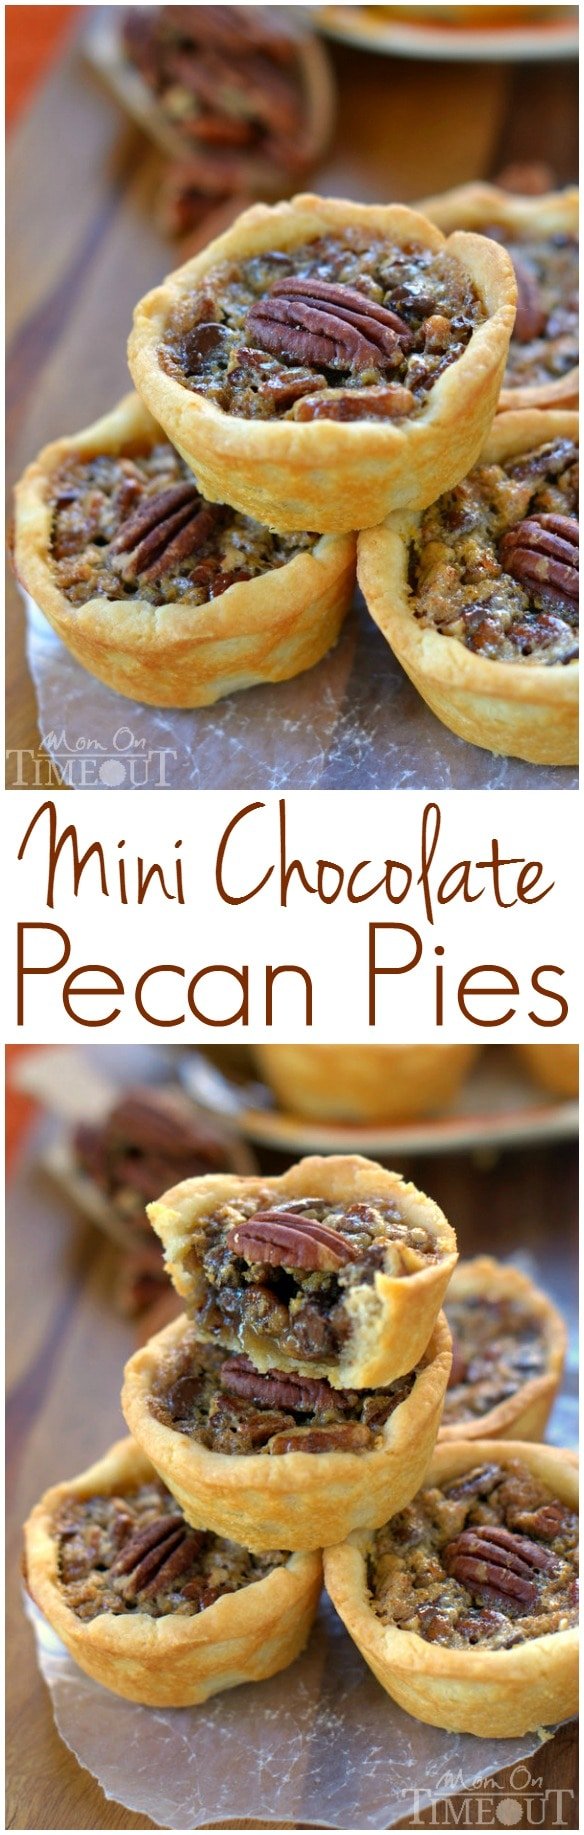 These Mini Chocolate Pecan Pies are a dream come true for the holidays! Sweet chocolate morsels are the perfect addition to traditional pecan pie and everybody loves this mini version! | MomOnTimeout.com | #dessert #Challenge Butter #PinaRecipeFeedaChild 